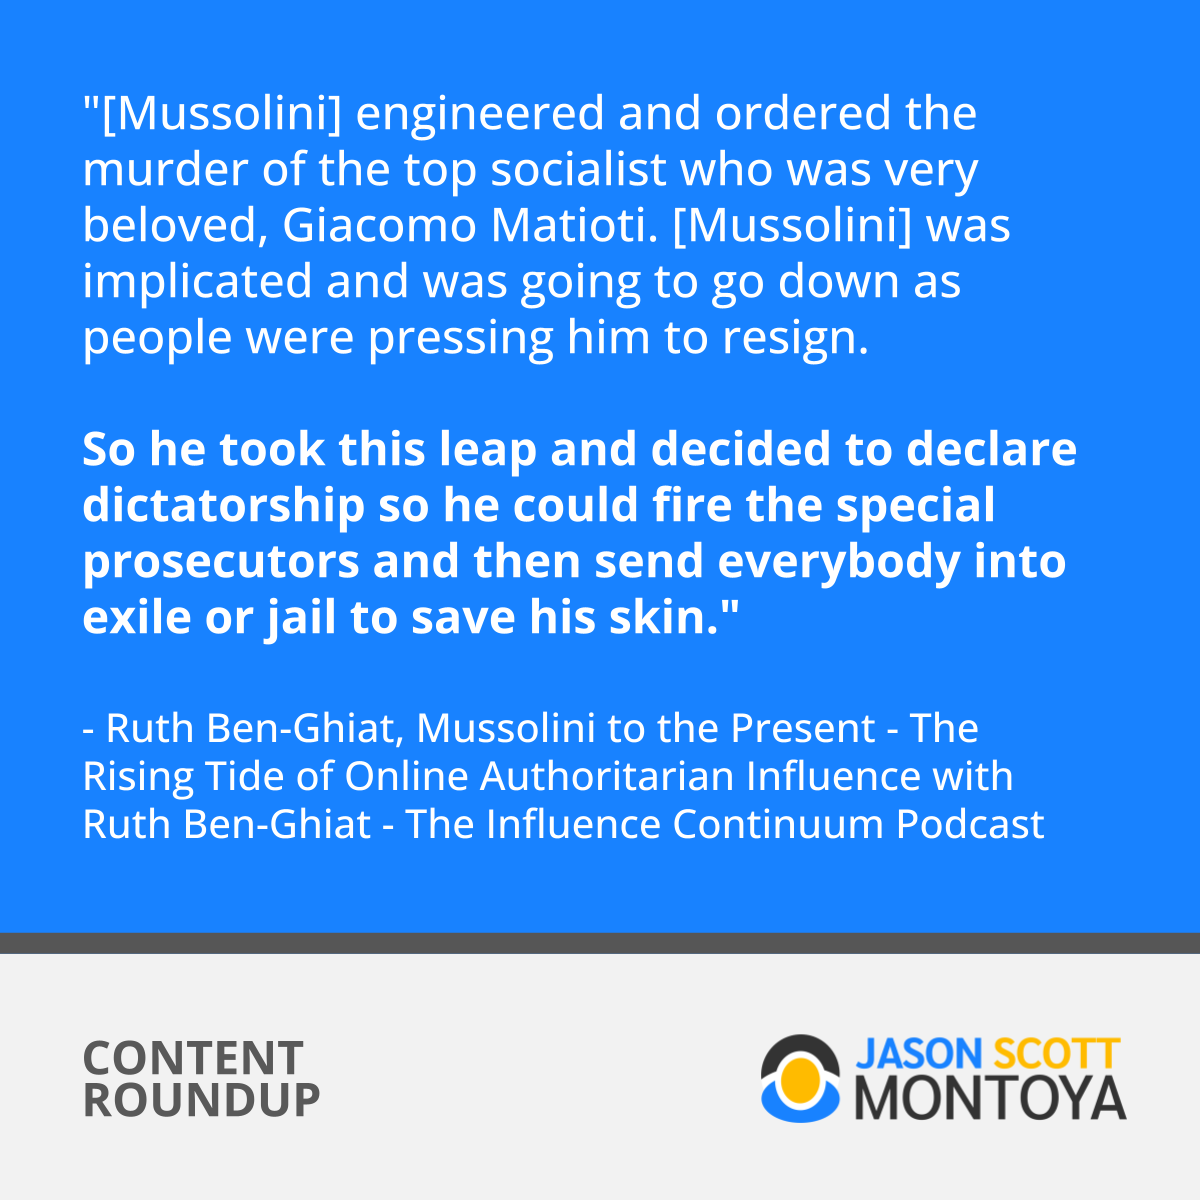 "[Mussolini] engineered and ordered the murder of the top socialist who was very beloved, Giacomo Matioti. [Mussolini] was implicated and was going to go down as people were pressing him to resign. So he took this leap and decided to declare dictatorship so he could fire the special prosecutors and then send everybody into exile or jail to save his skin." - Ruth Ben-Ghiat